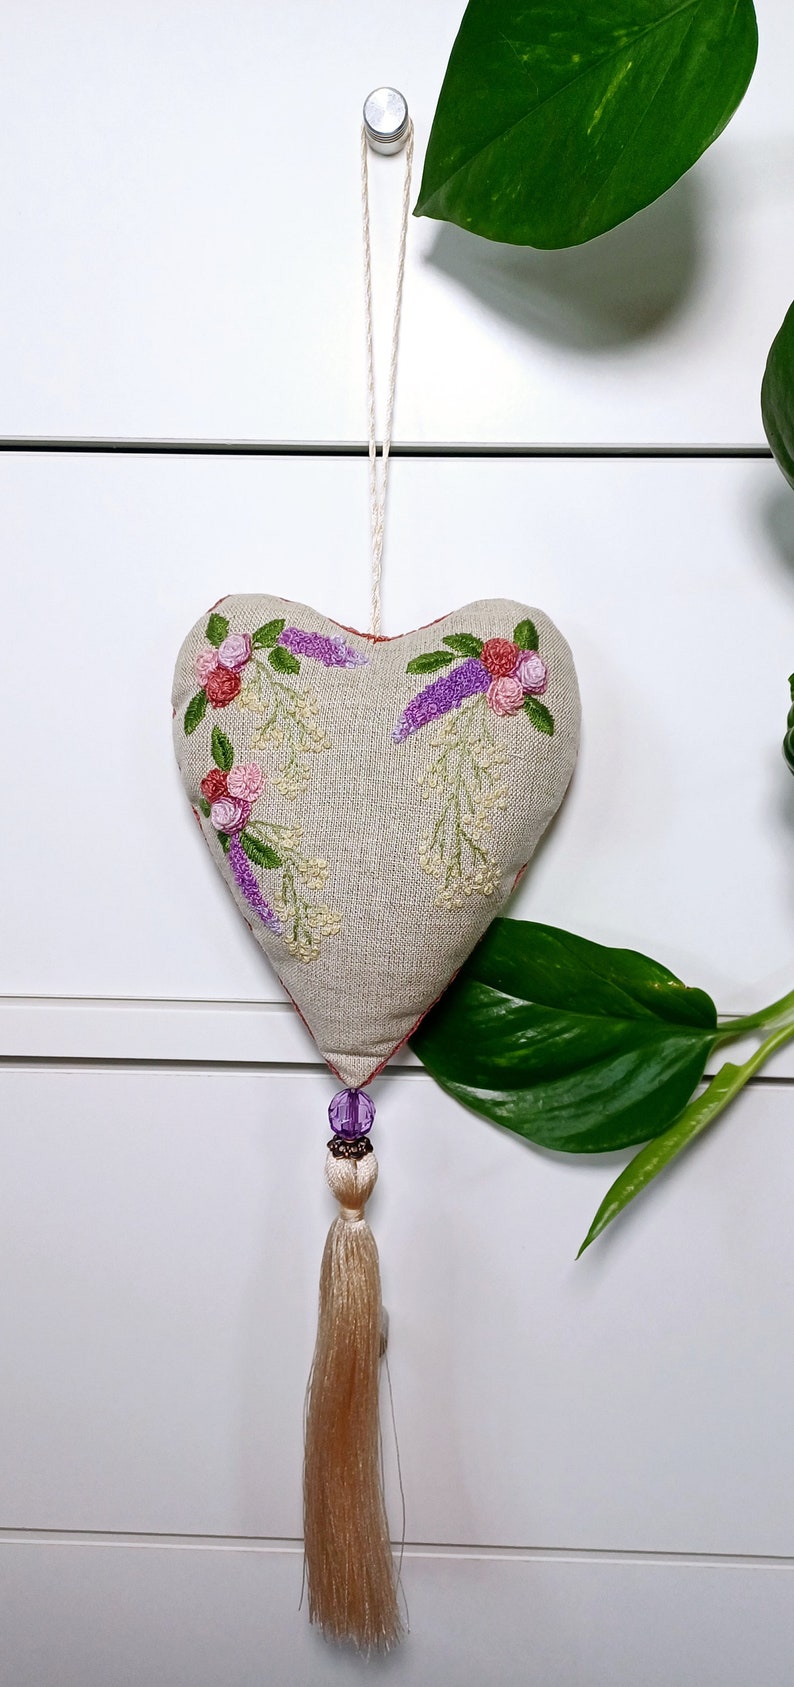 Handmade embroidered linen heart shaped home decor sachet, with hanging loop and tassel. Hung on a drawer knob.